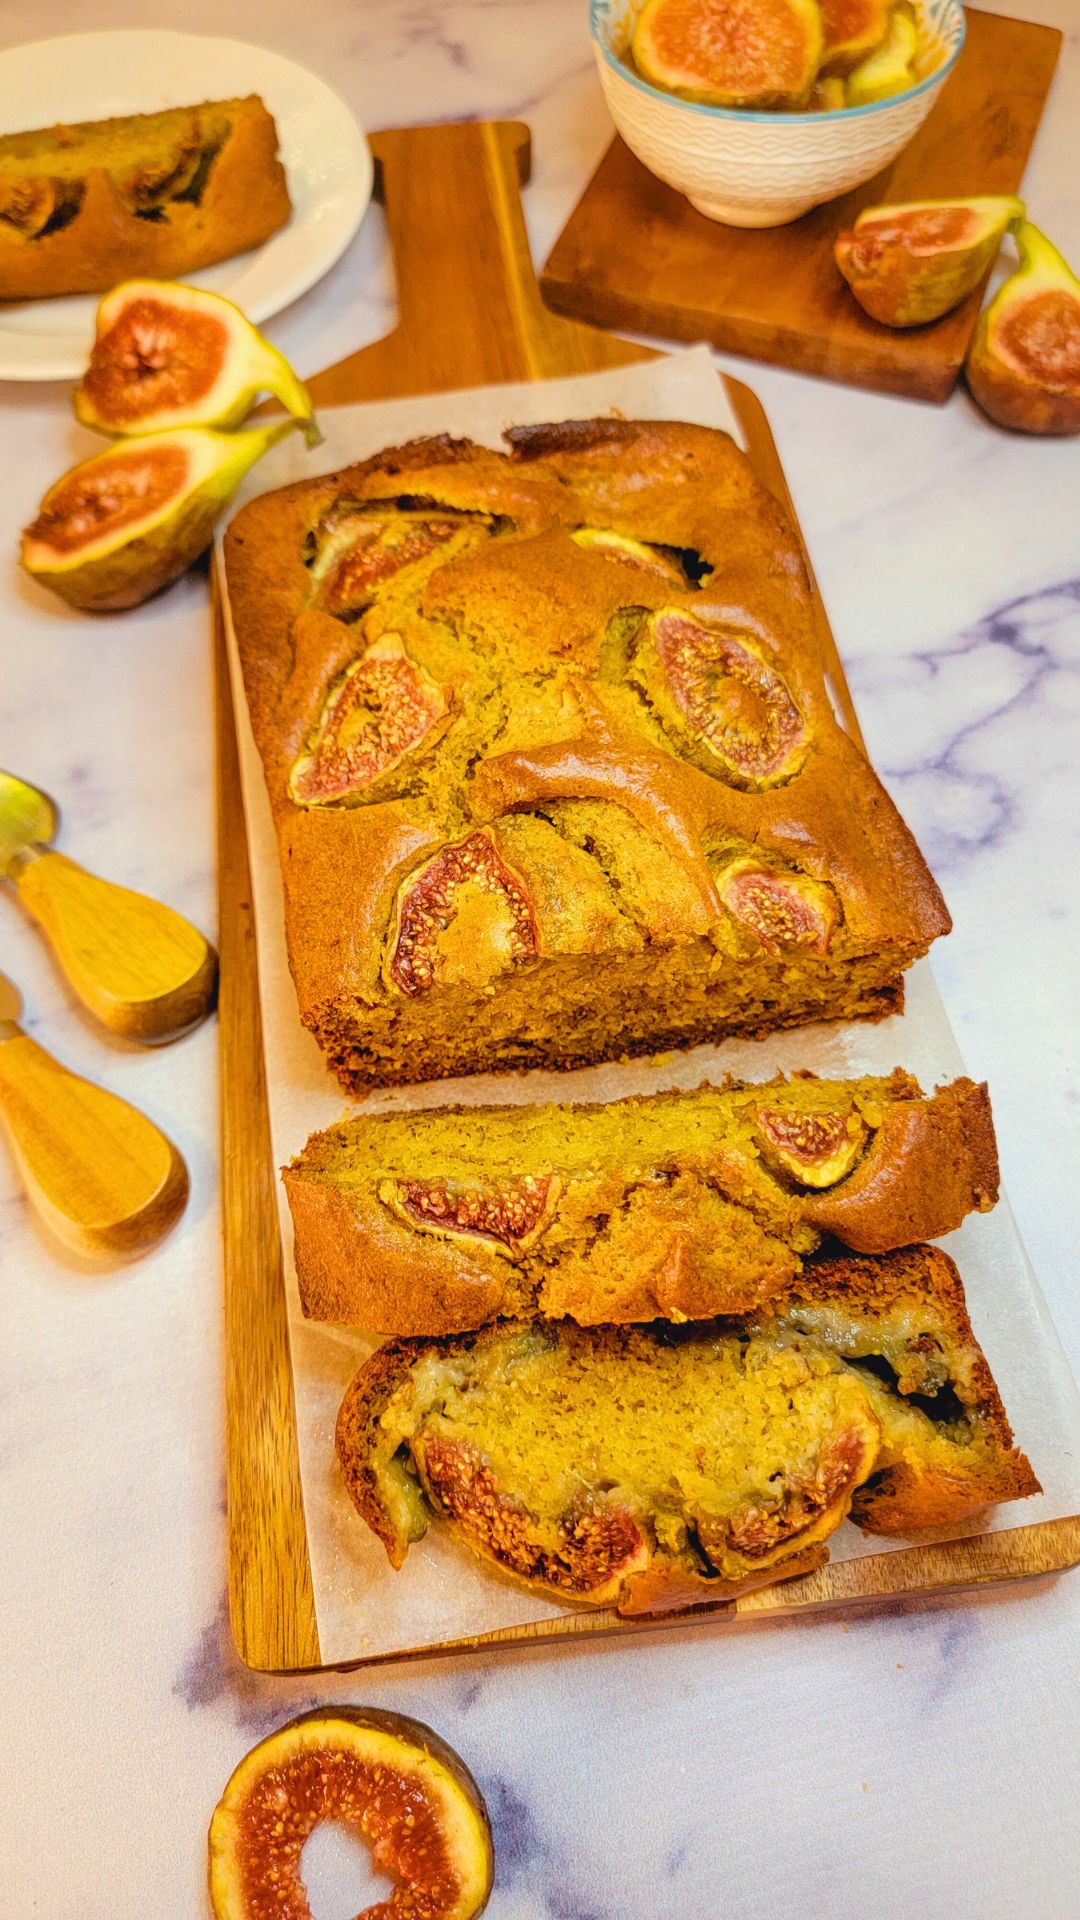 A loaf of fig bread with figs baked onto the top. Half the loaf is sliced with slices laying sideways on the cutting board.